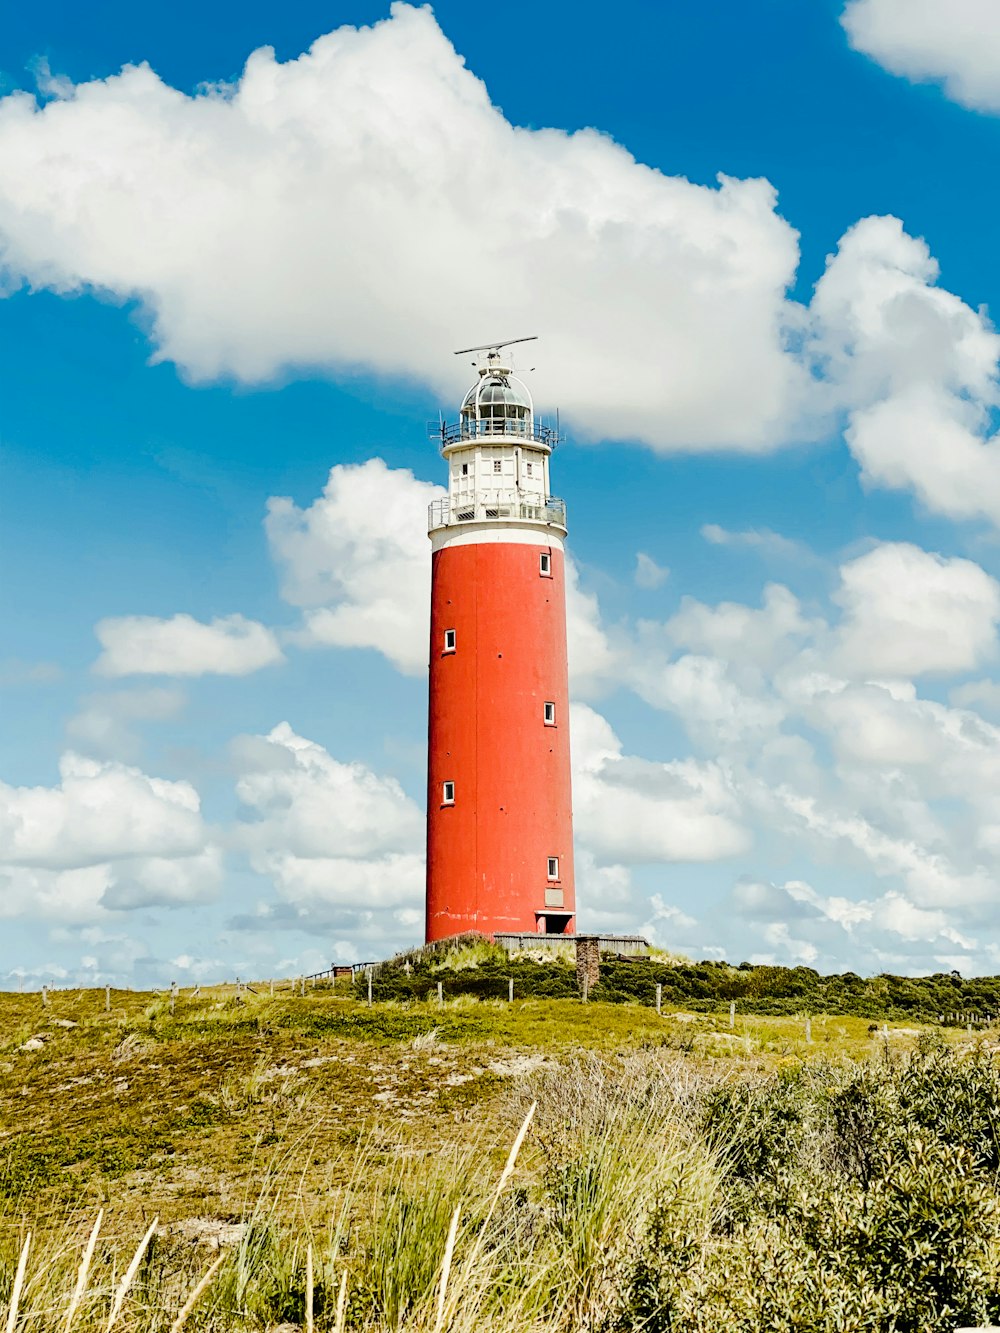 red and white lighthouse under blue sky and white clouds during daytime